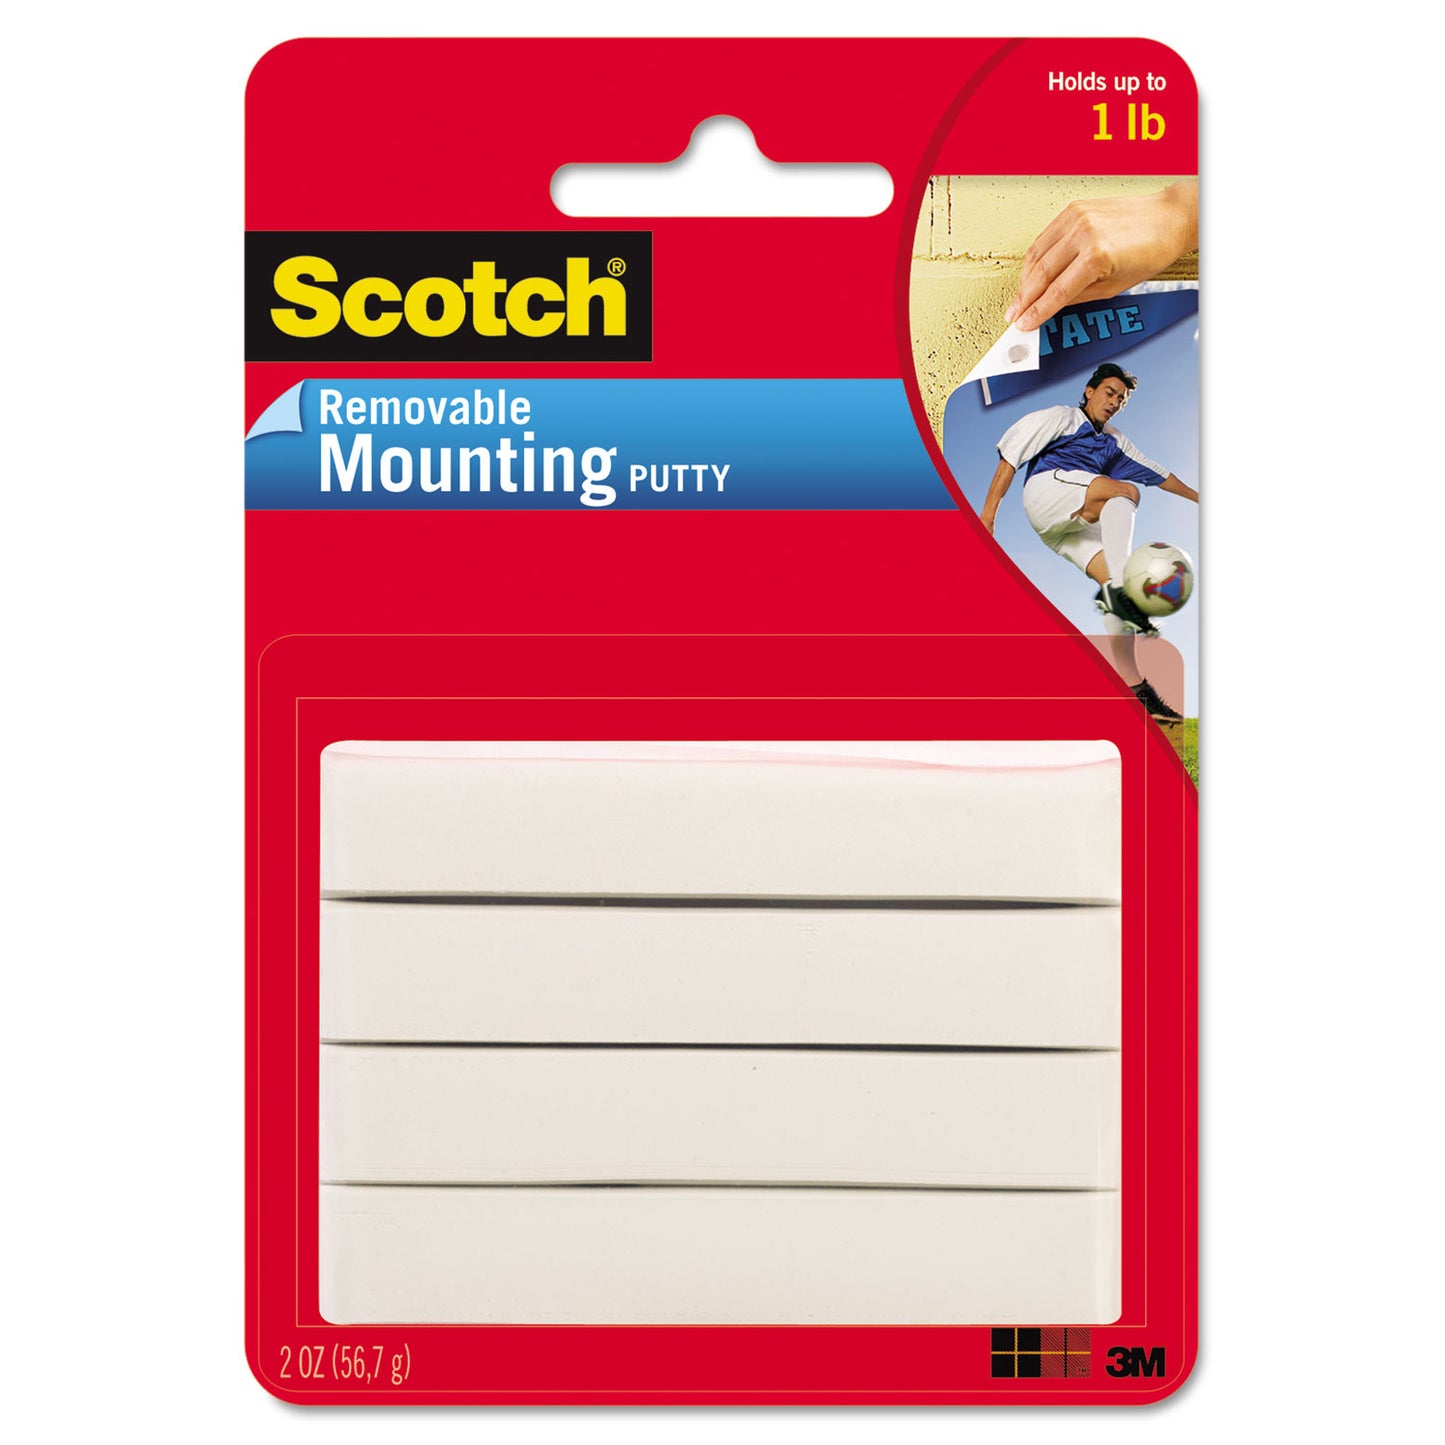 Scotch Adhesive Putty, Nontoxic, 2 oz, Artwork, Photos Paper and many more